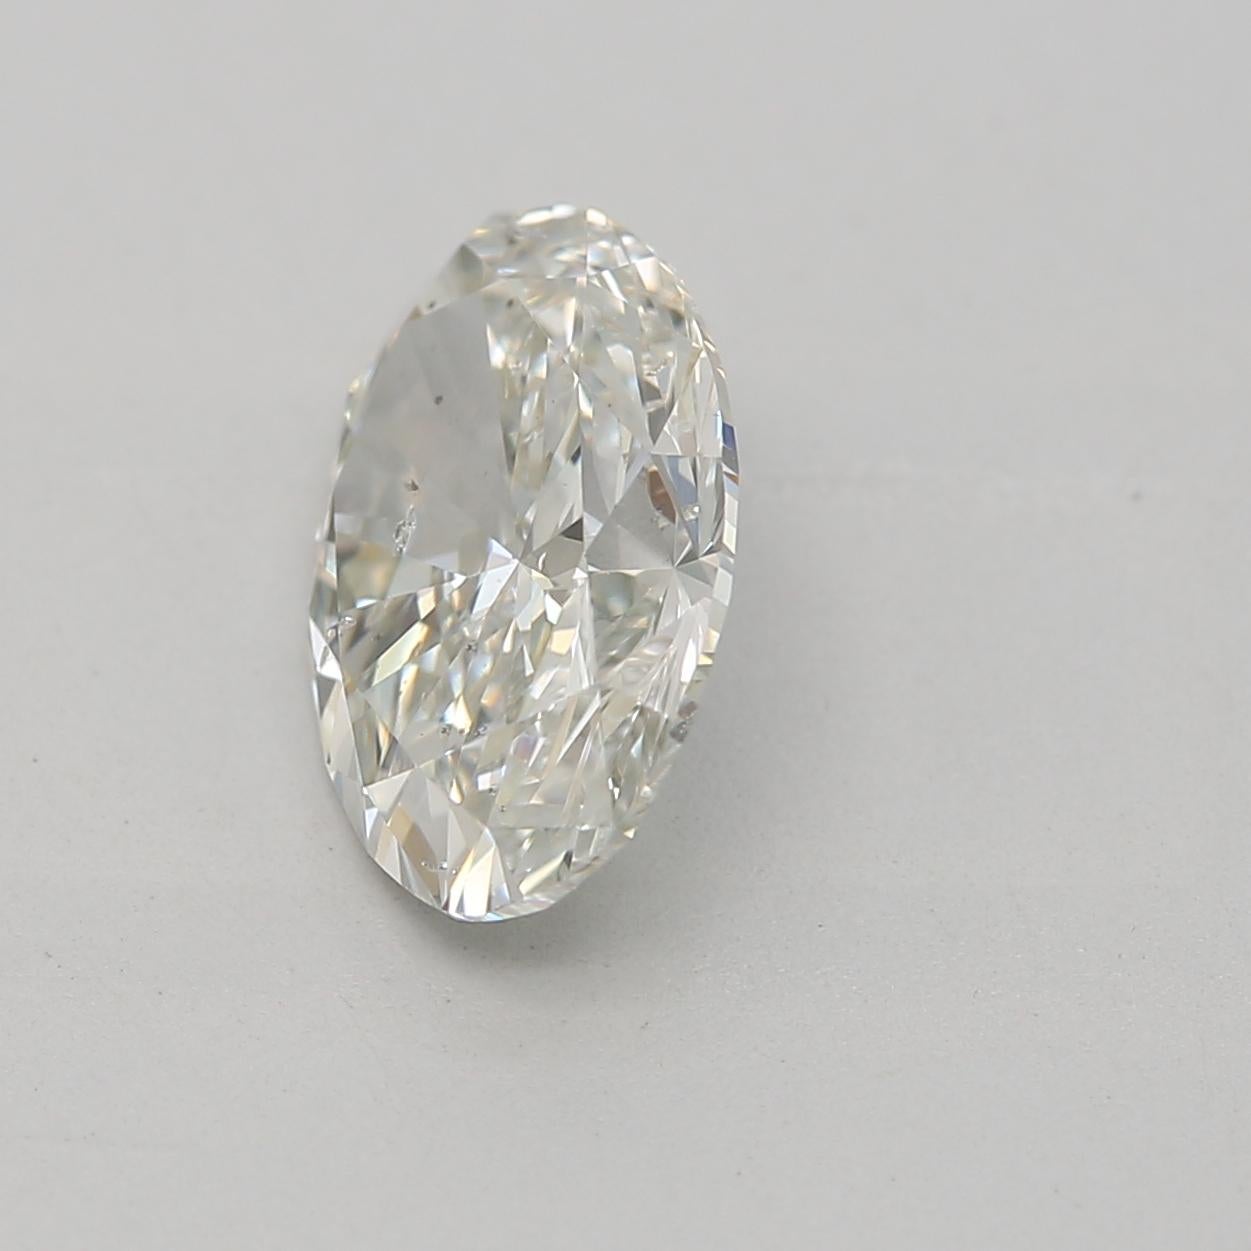 Oval Cut 1.01 Carat Light Yellow Green Oval cut diamond SI2 Clarity GIA Certified For Sale